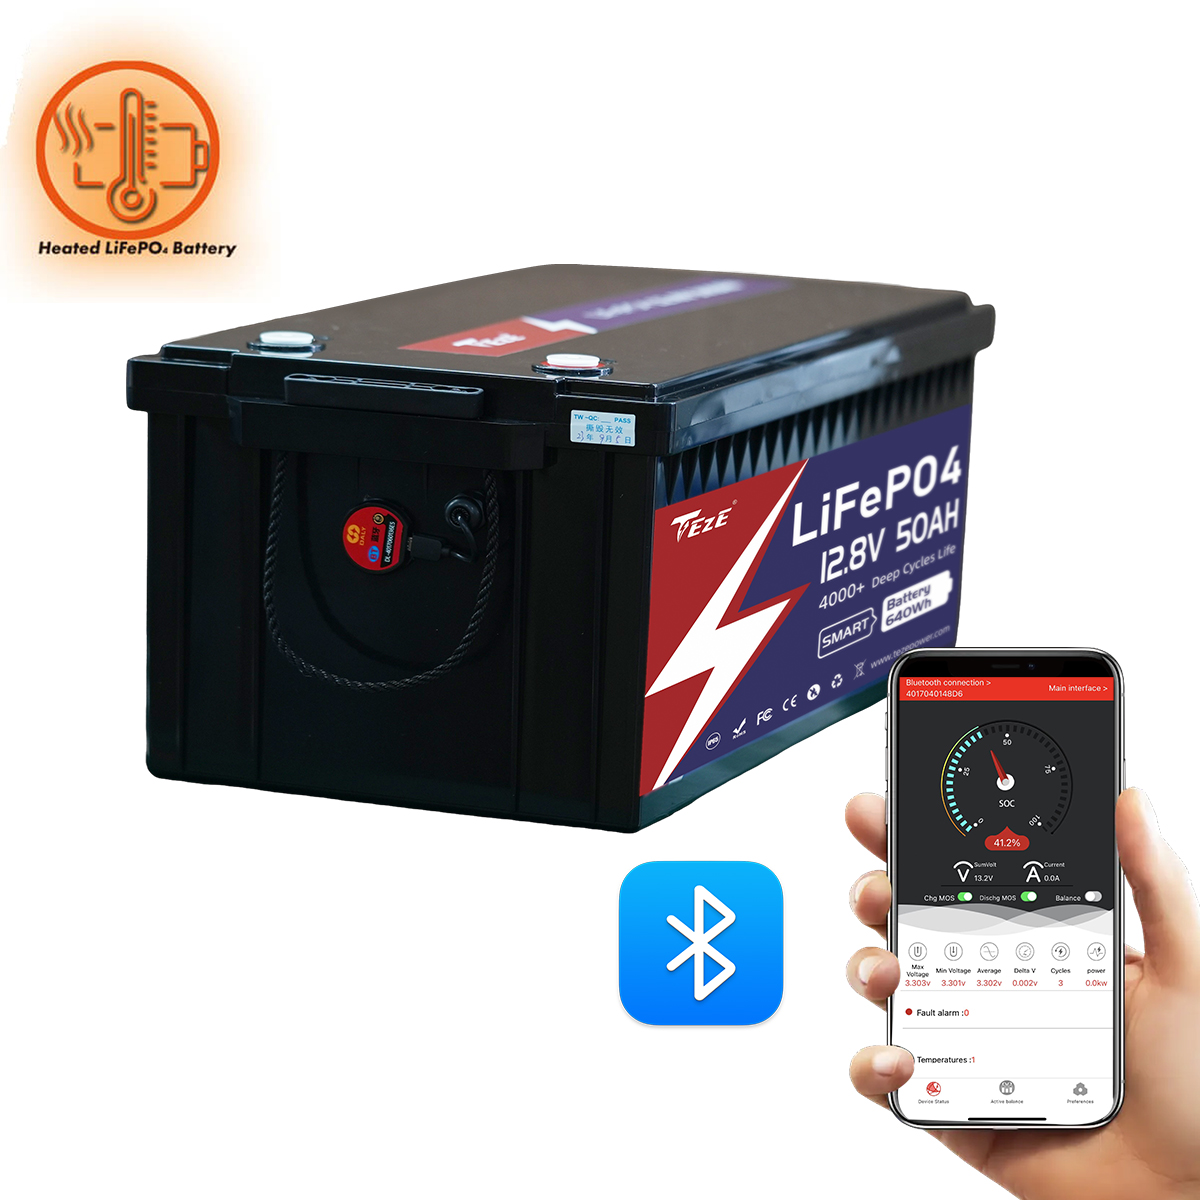 NEW-TezePower 12V50Ah LiFePO4 Battery with Bluetooth, Self-heating and Active Balancer, Built-in 50A Daly BMS (Bluetooth External Version)